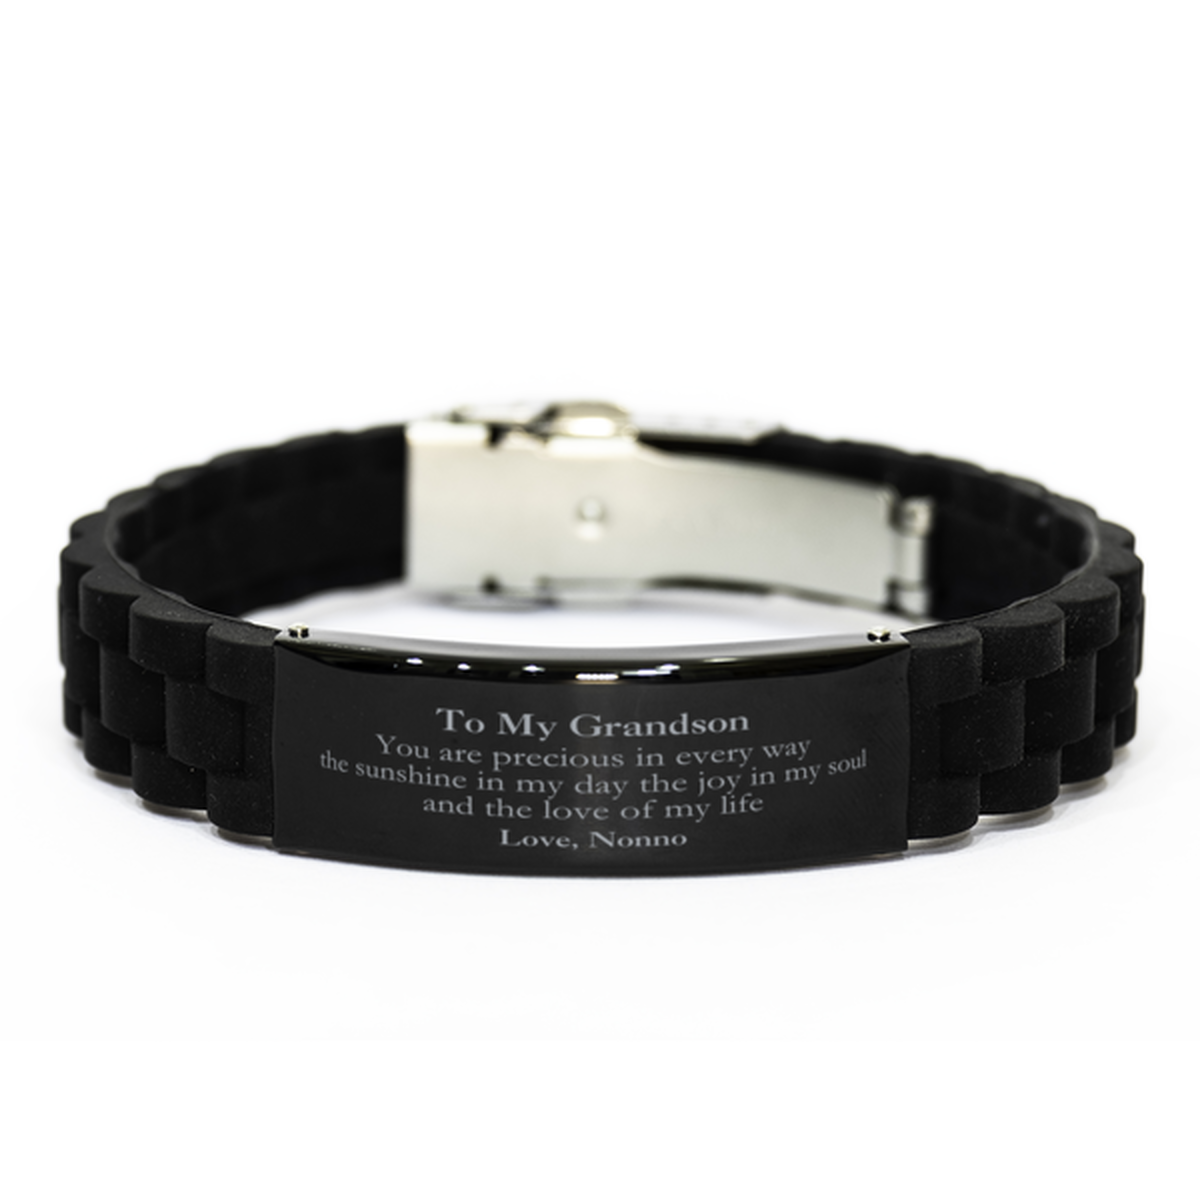 Graduation Gifts for Grandson Black Glidelock Clasp Bracelet Present from Nonno, Christmas Grandson Birthday Gifts Grandson You are precious in every way the sunshine in my day. Love, Nonno